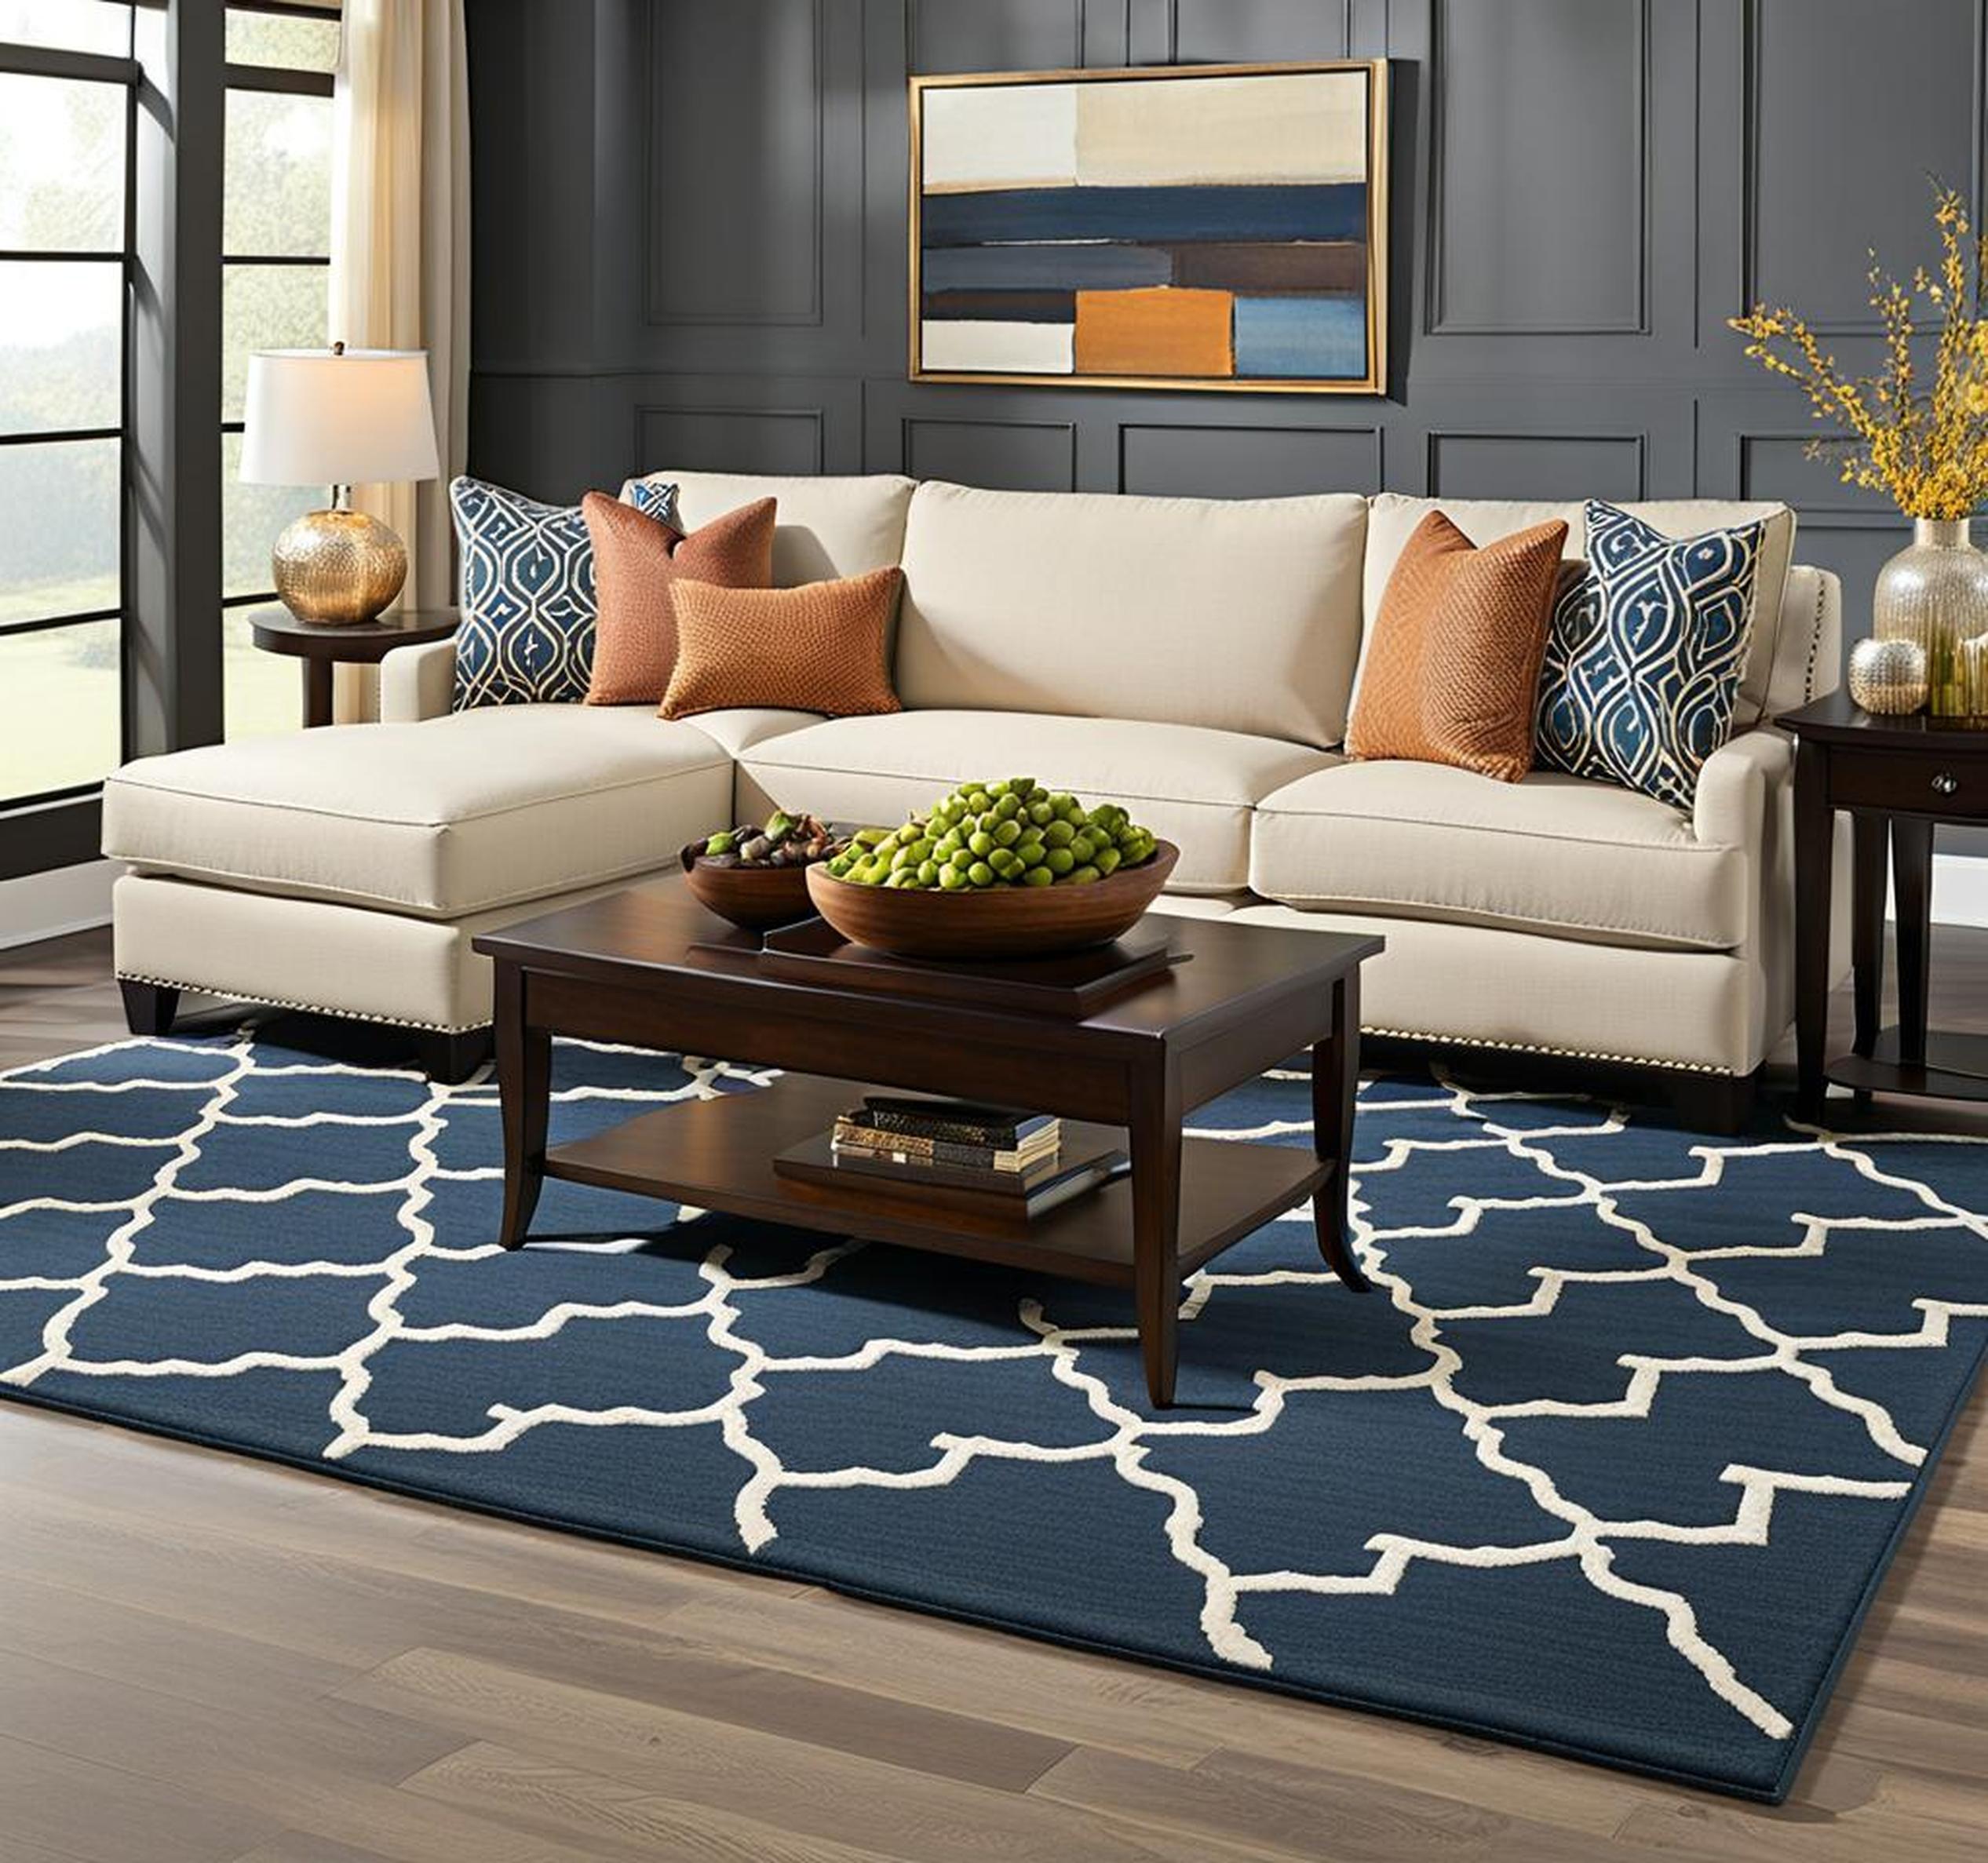 rug size for sectional sofa